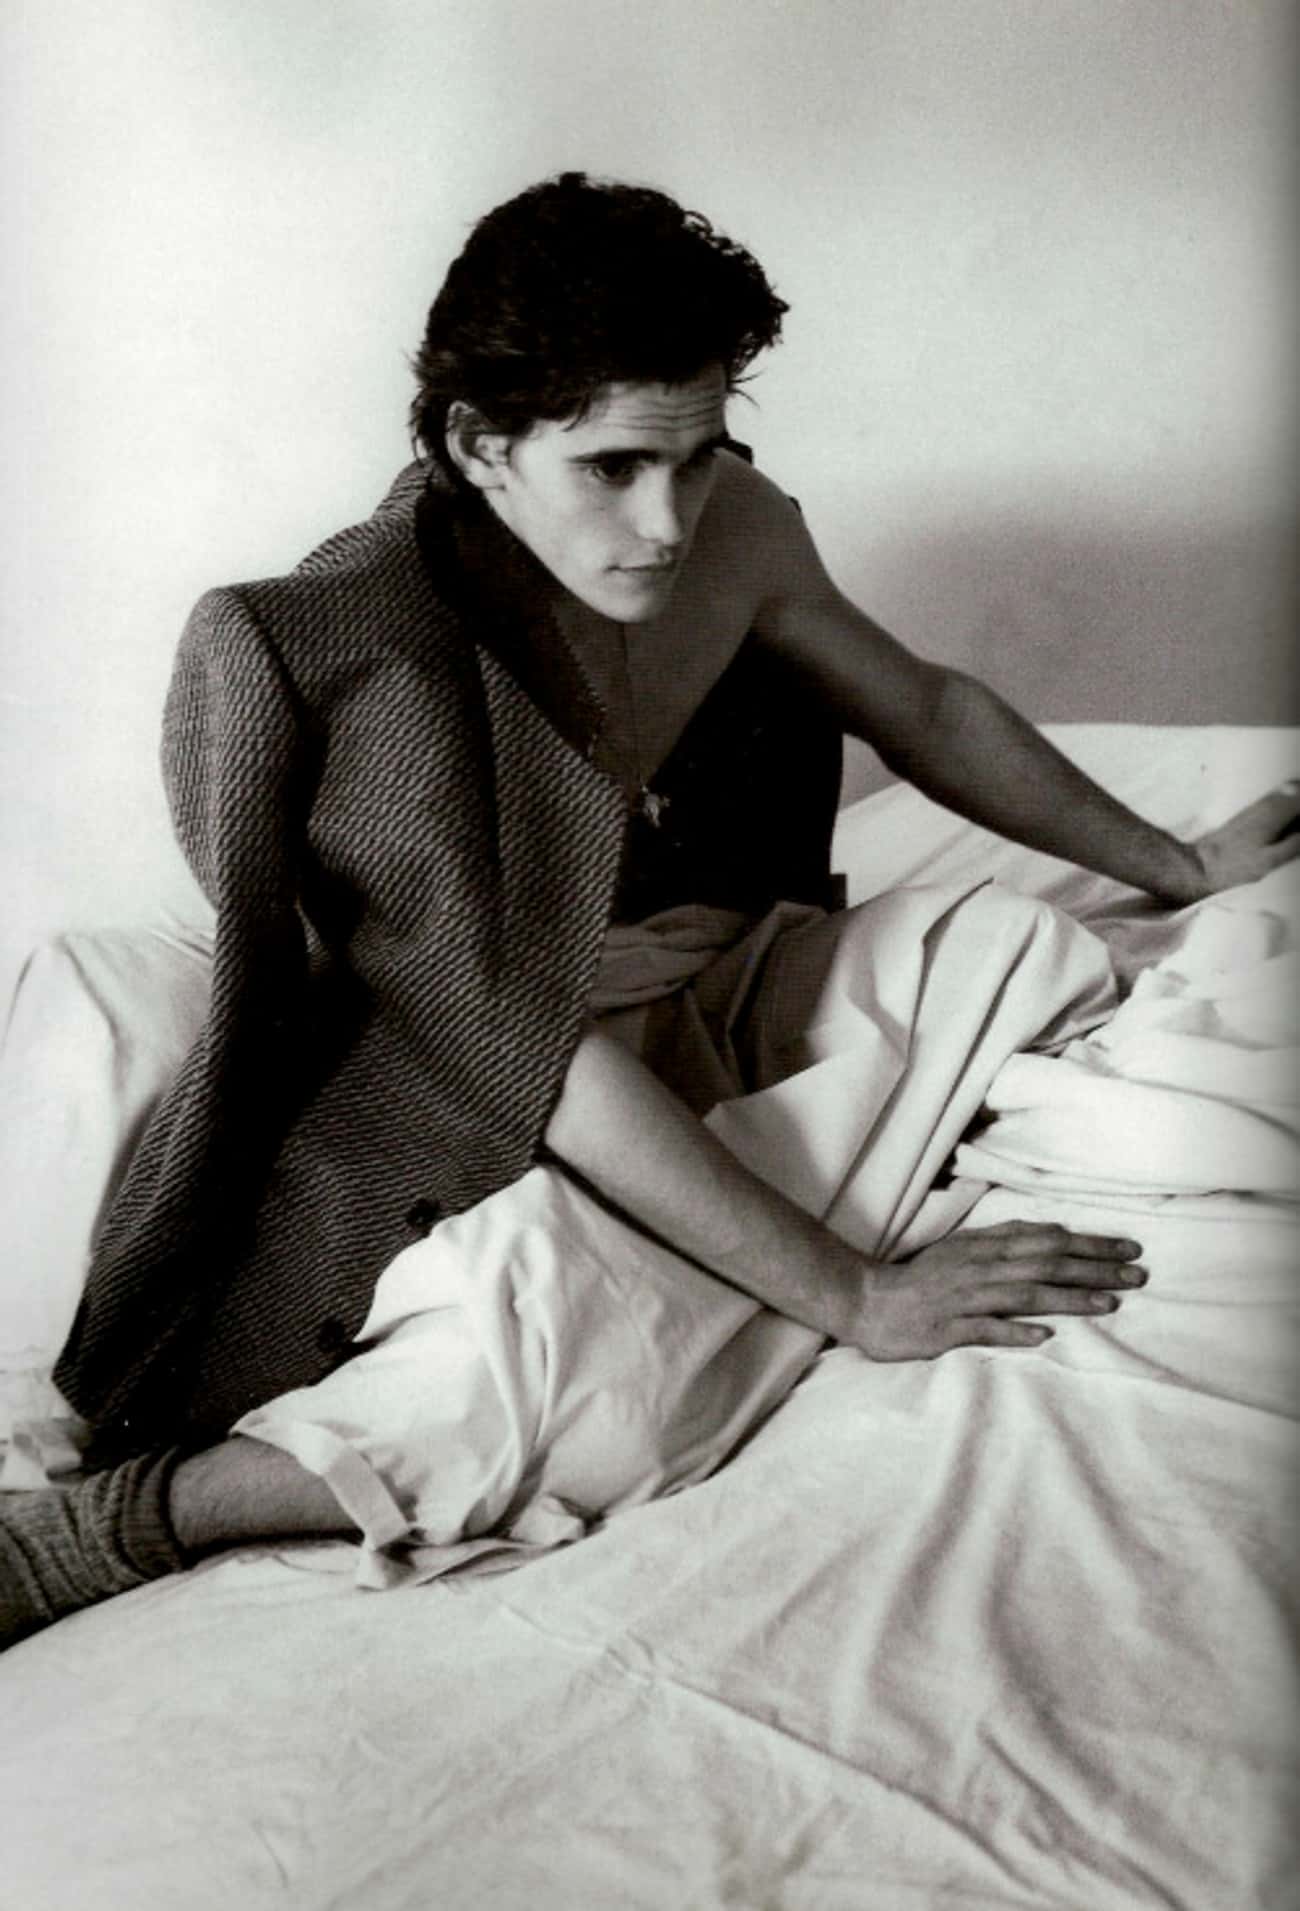 Young Matt Dillon Sitting in Bed with Sports Coat over Shoulder